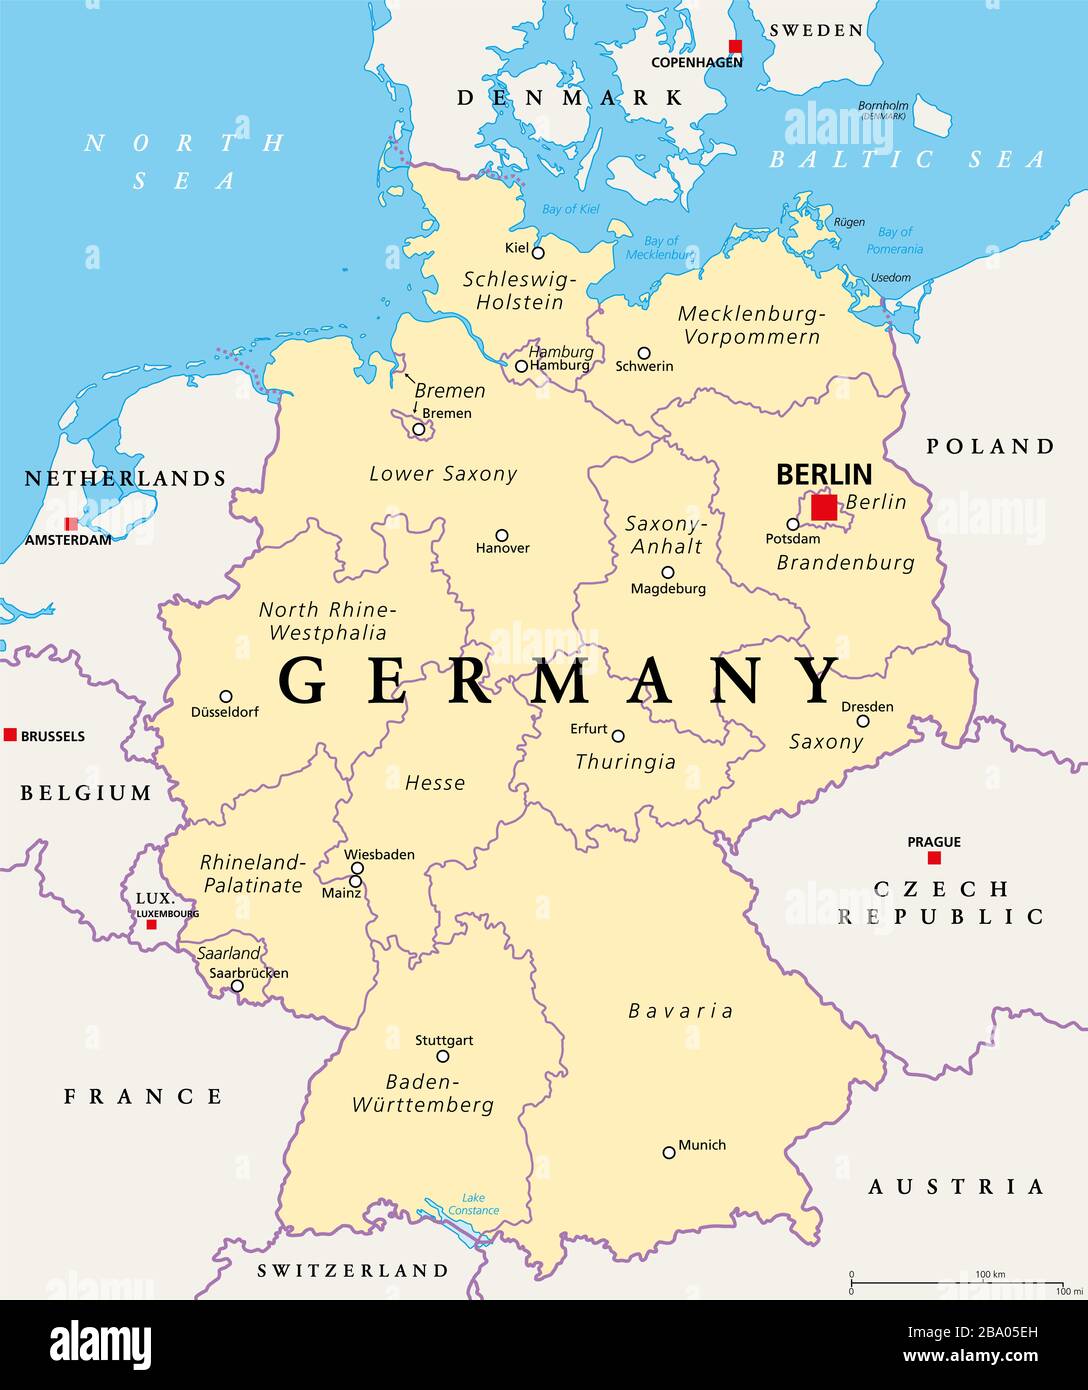 Germany, political map. States of the Federal Republic of Germany with capital Berlin and 16 partly-sovereign states. Country in Europe. Stock Photo